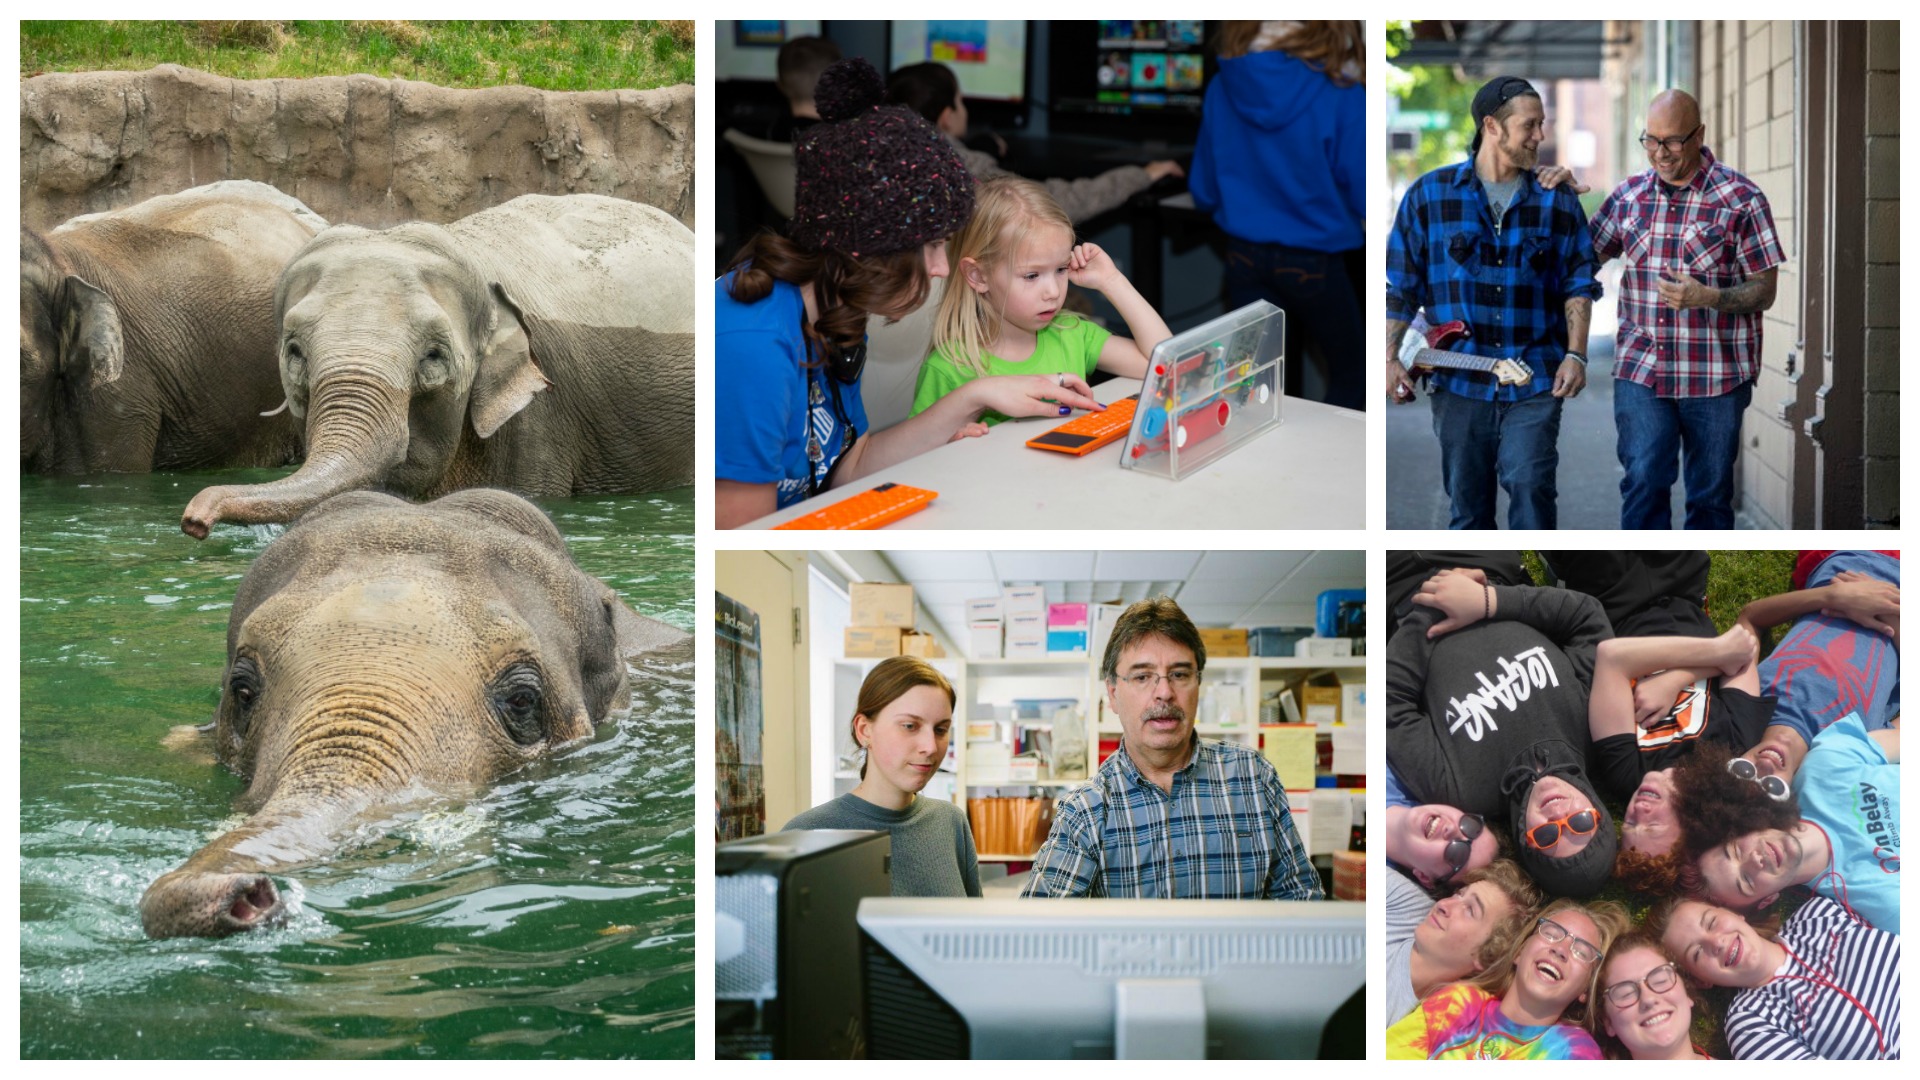 Image 1: three elephants swim in a pool with a stone wall in the background. Image 2: a young woman wearing a knit beanie helps a young child with a project at a white table. Image 3: a man with short dark hair, a gray mustache, and glasses wearing a blue plaid shirt looks at a computer next to a woman with straight brown hair wearing a gray sweater. Image 4: two men wearing plaid shirts and jeans walk down the street talking and laughing while of them holds an electric guitar. Image 5: a group of teenagers lay in a circle on the grass with their heads touching.  